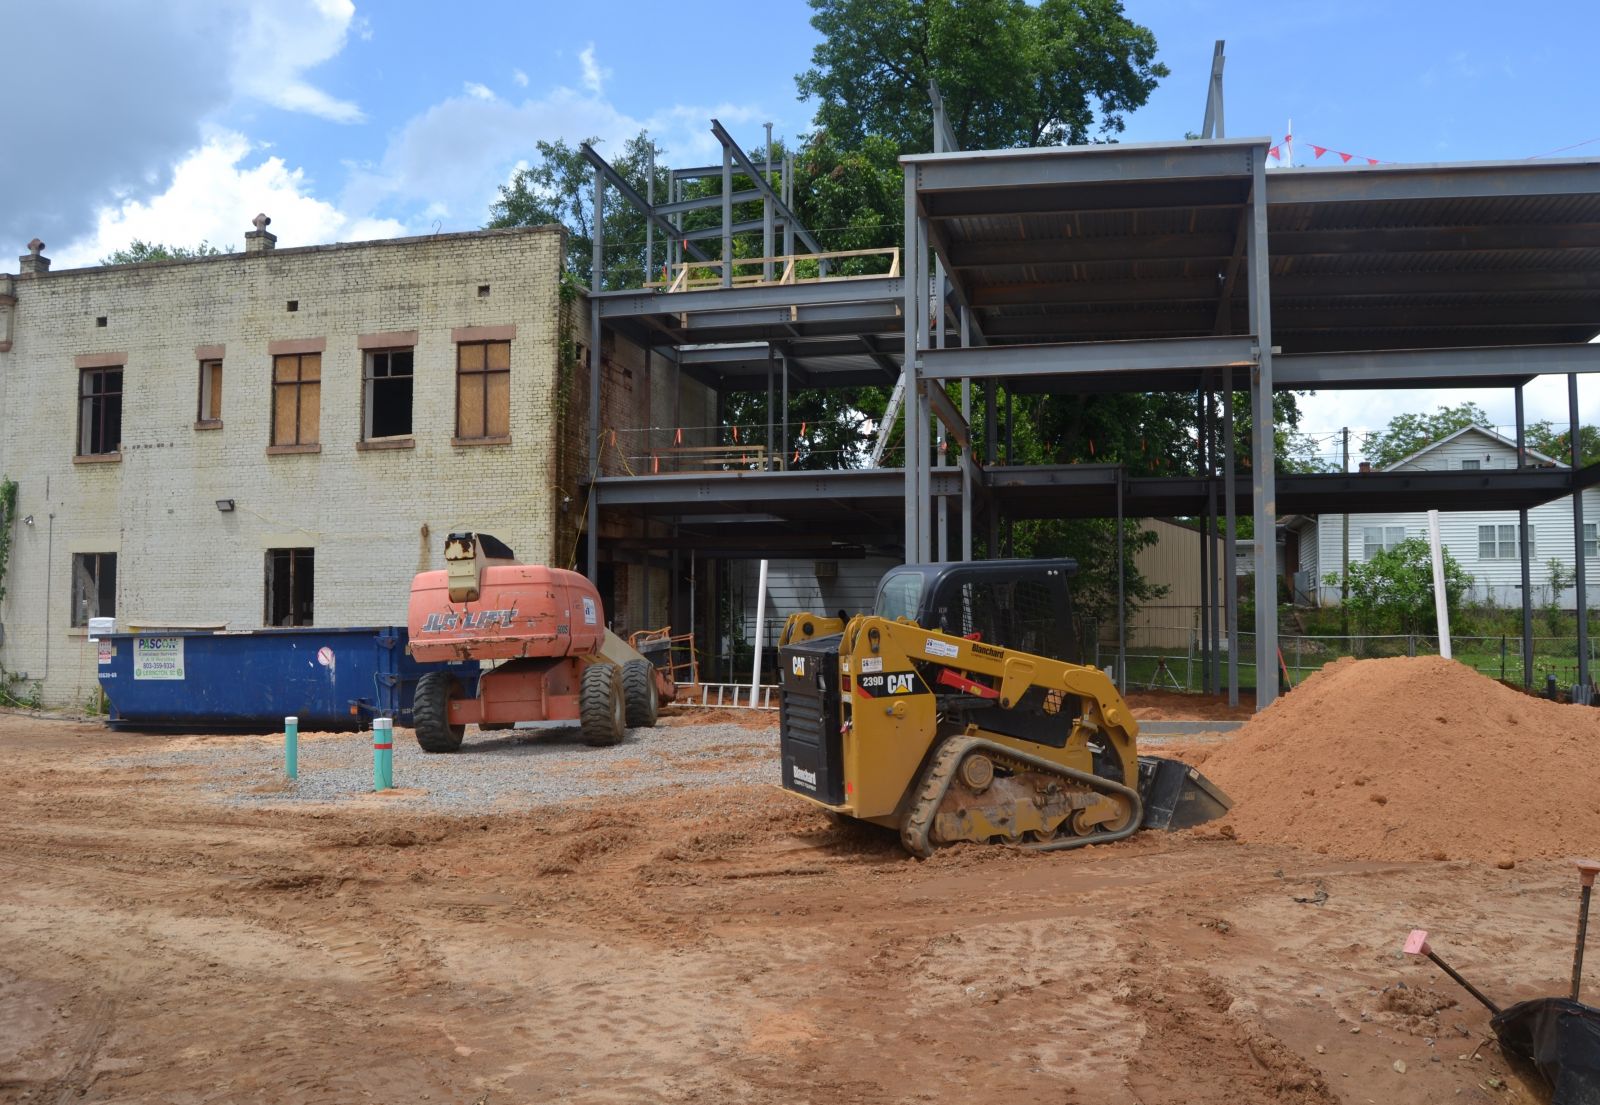 Construction continues at Savage Craft Ale Works in West Columbia, on track for a late September opening after delays which included approval and installation of a 54-inch drainage pipe in the low-lying area off Center Street. The site includes a former fire station and city jail. (Photo/Melinda Waldrop)